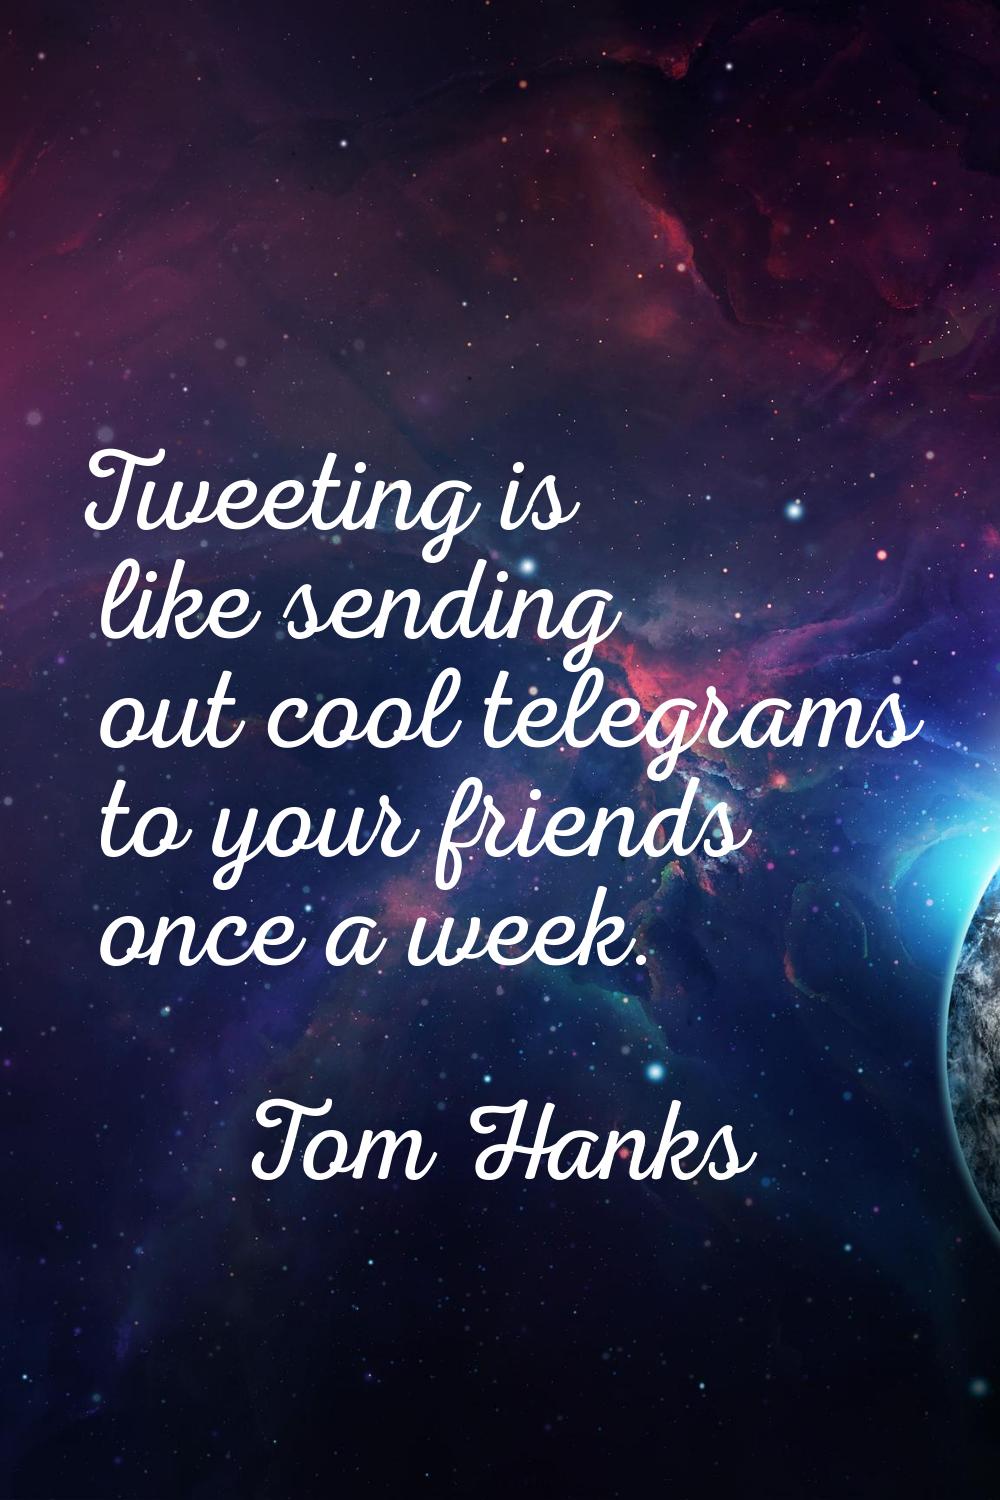 Tweeting is like sending out cool telegrams to your friends once a week.